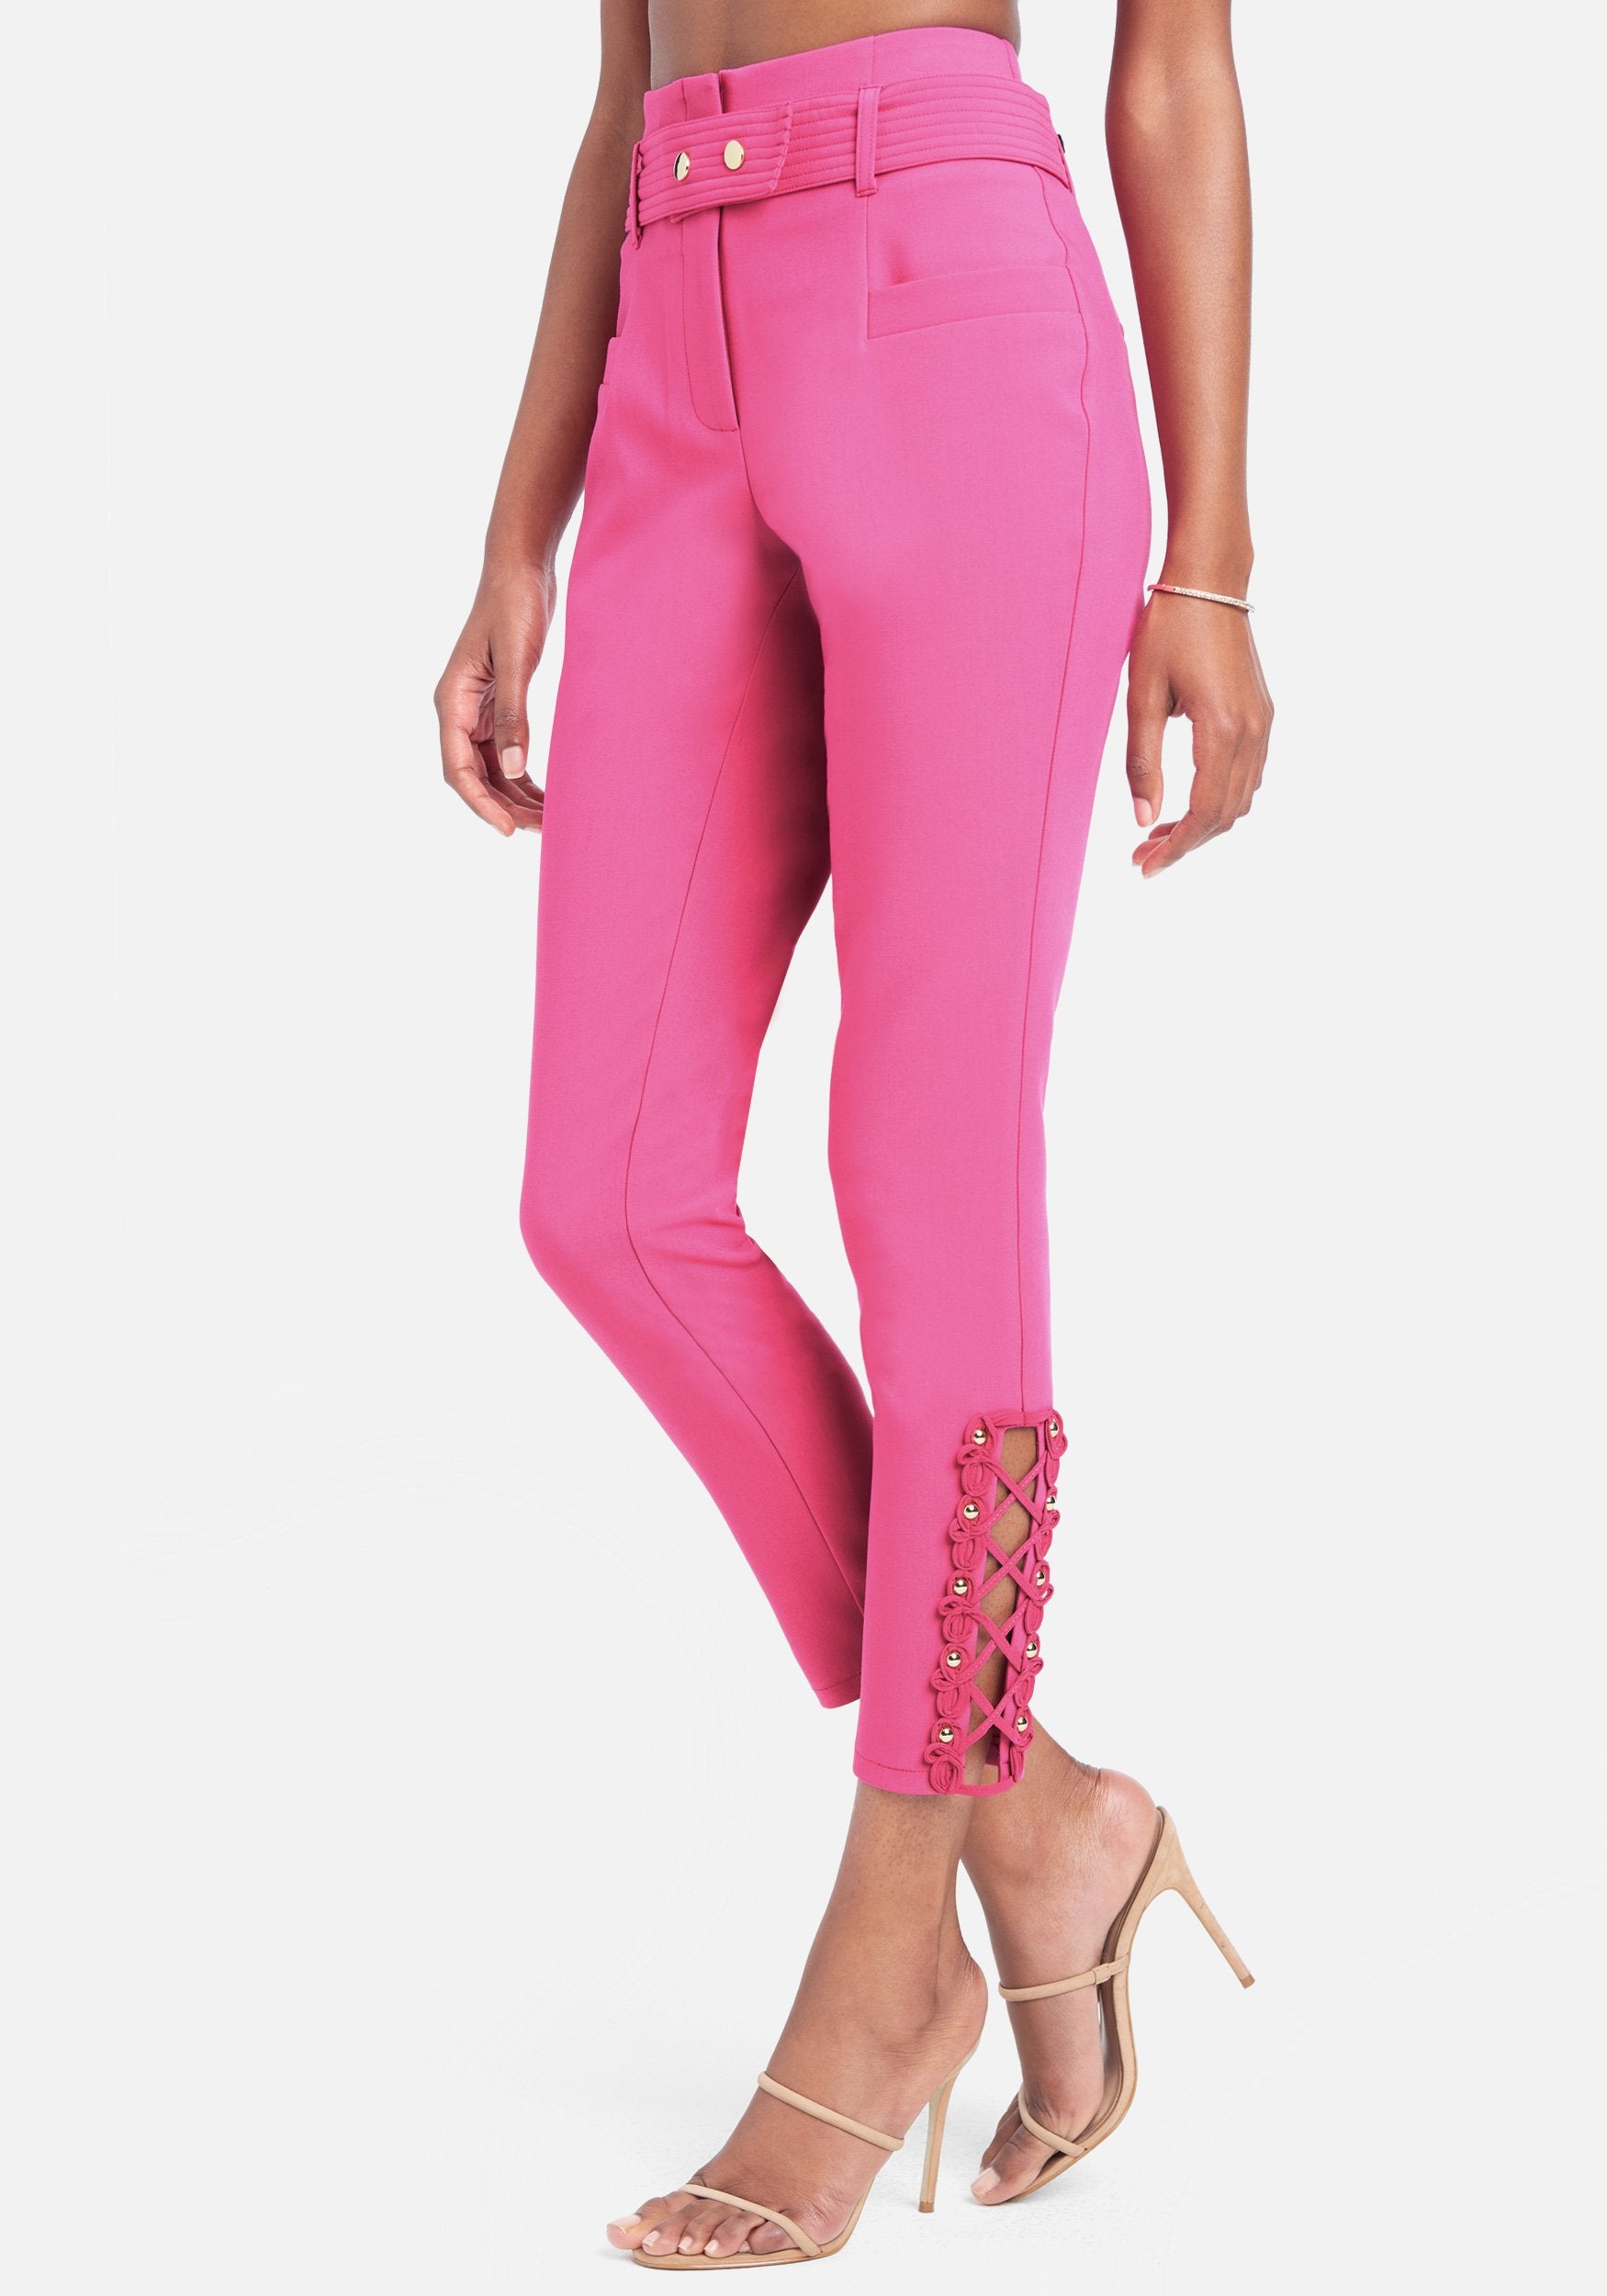 Bebe Women's Stretch Twill Fitted Belted Pant, Size 4 in Fuchsia Glow Spandex/Viscose